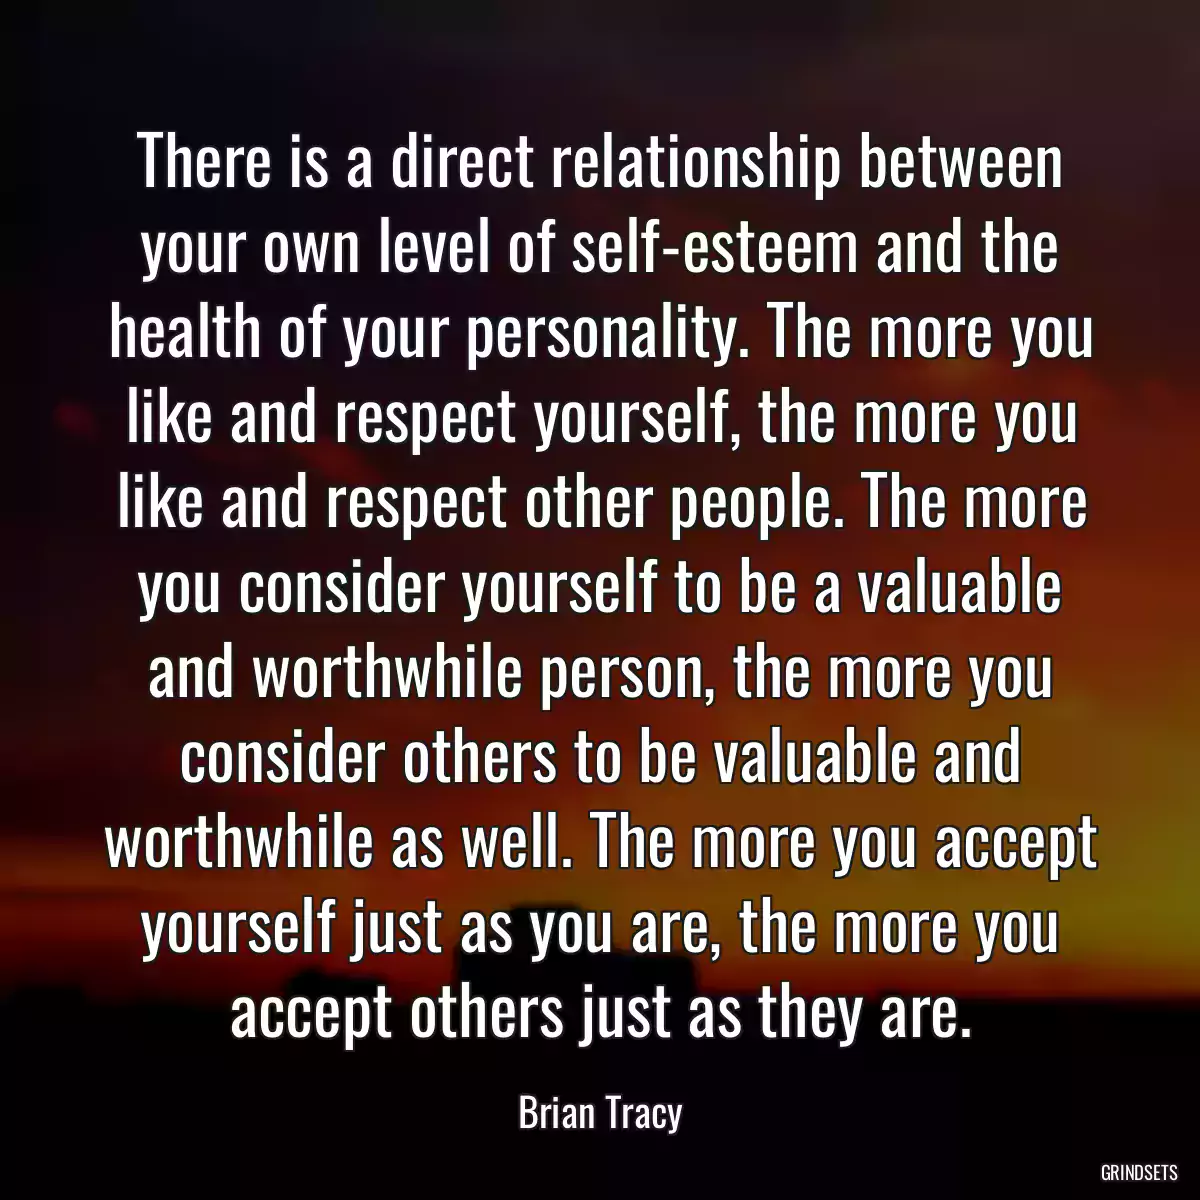 There is a direct relationship between your own level of self-esteem and the health of your personality. The more you like and respect yourself, the more you like and respect other people. The more you consider yourself to be a valuable and worthwhile person, the more you consider others to be valuable and worthwhile as well. The more you accept yourself just as you are, the more you accept others just as they are.